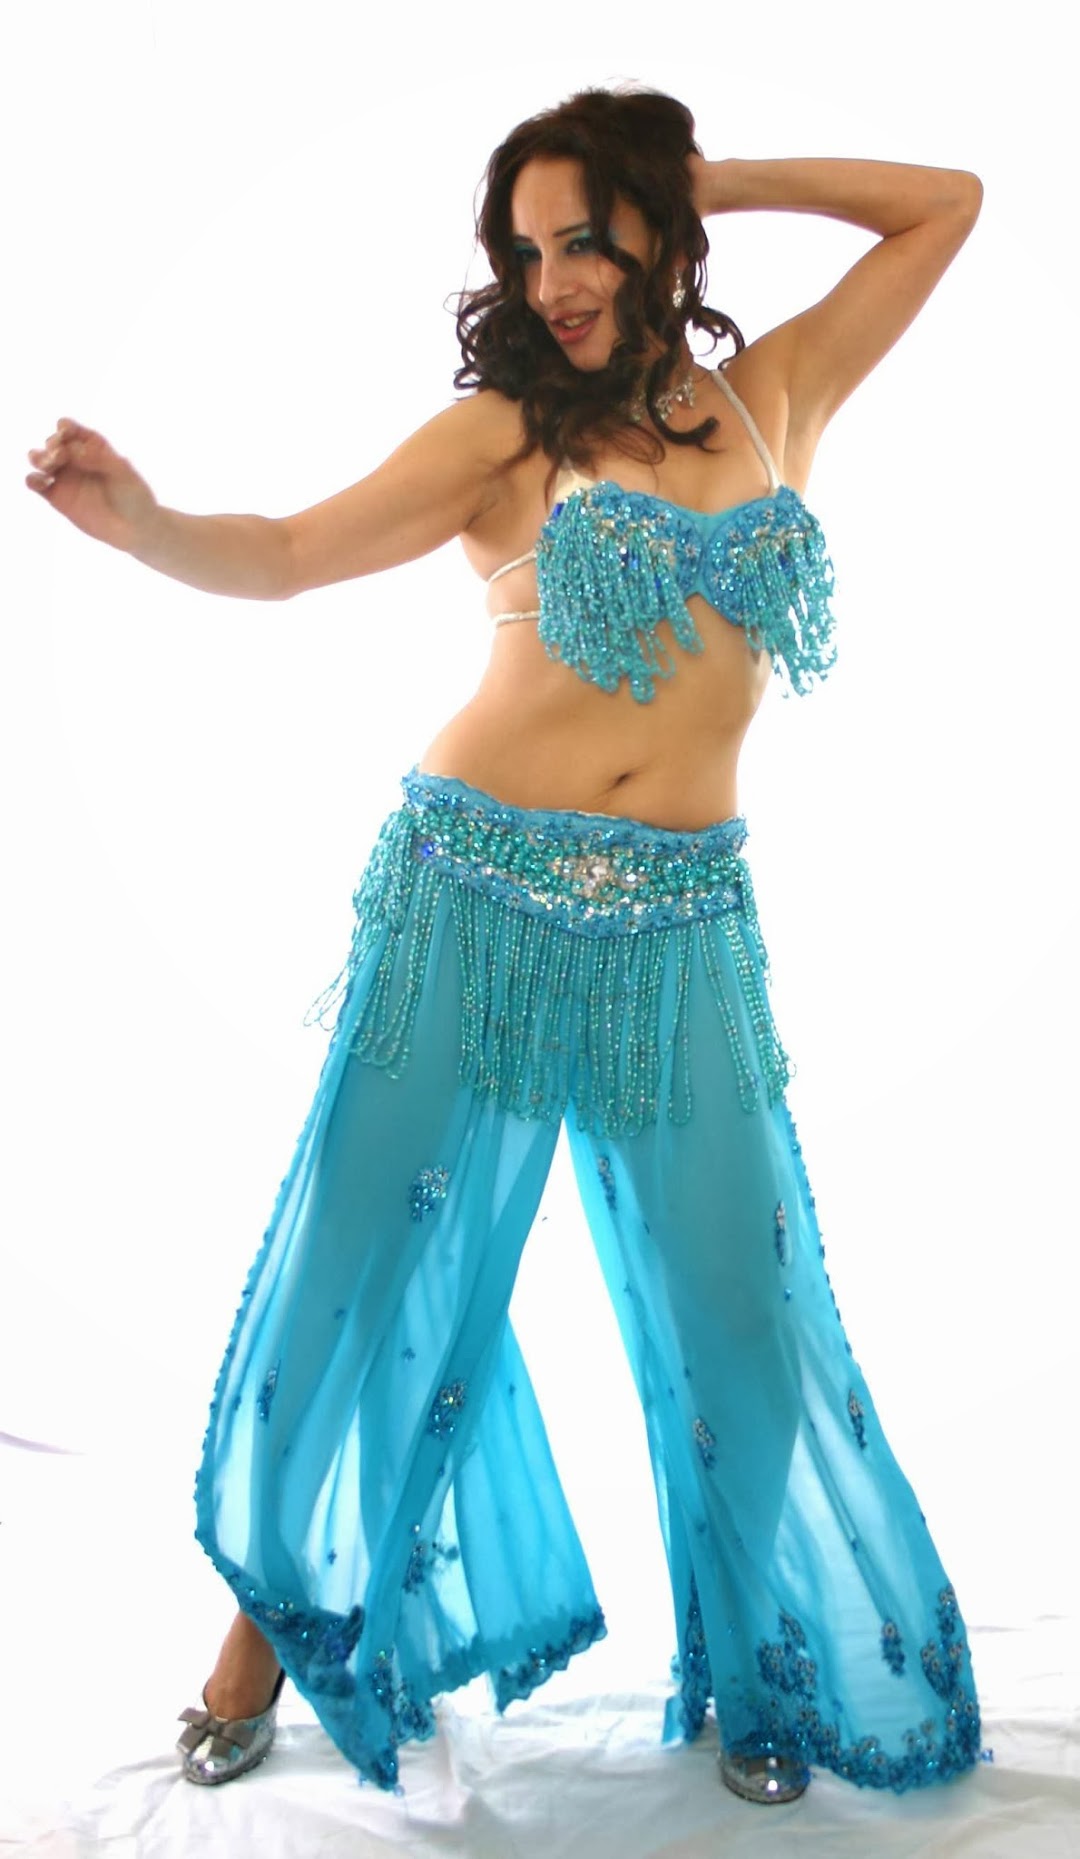 Al-Masrah Academy of Belly Dance and Yoga Arts